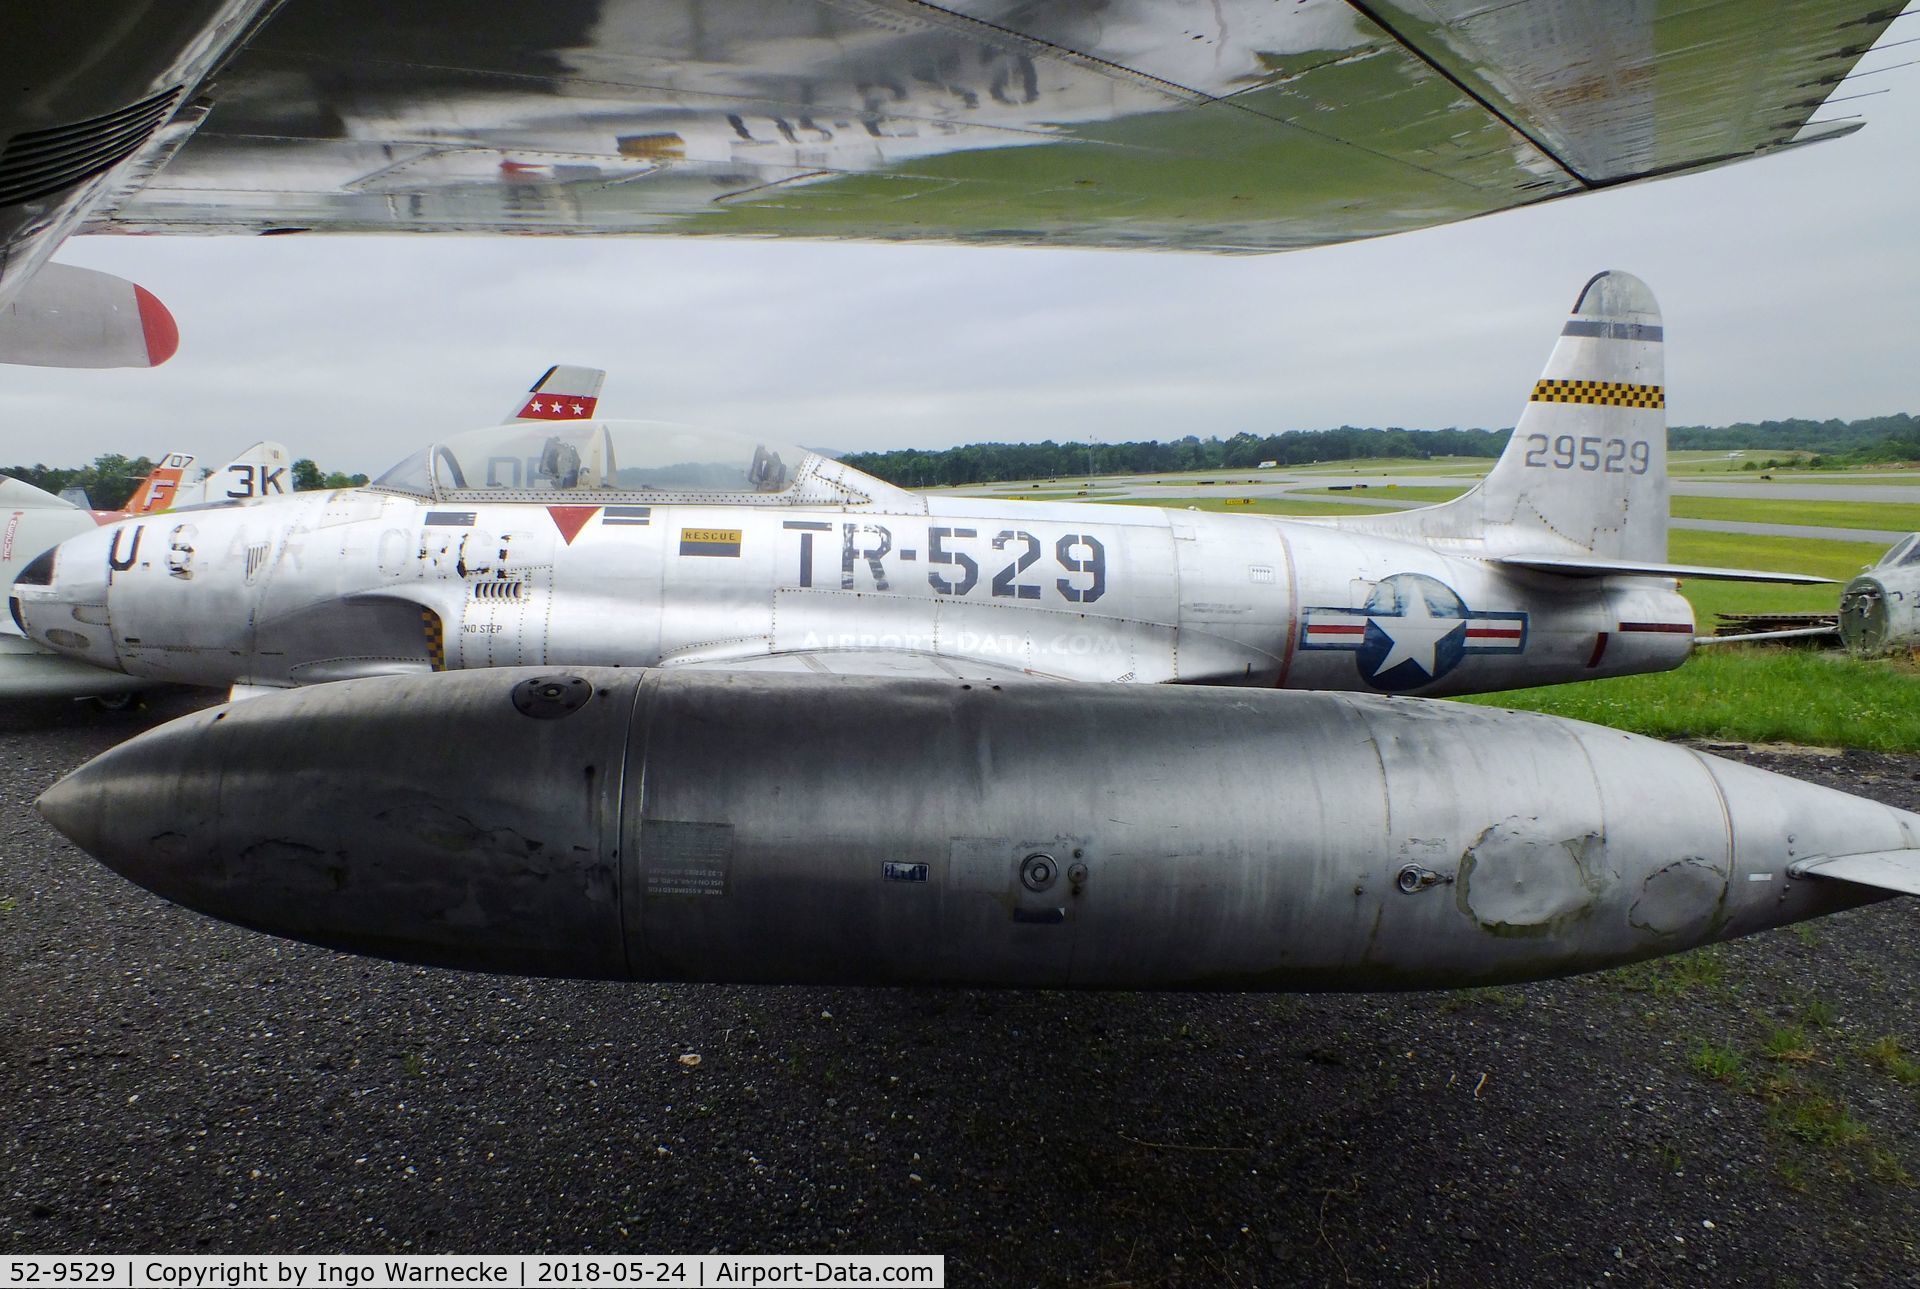 52-9529, 1952 Lockheed T-33A Shooting Star C/N 580-7664, Lockheed T-33A at the Hickory Aviation Museum, Hickory NC